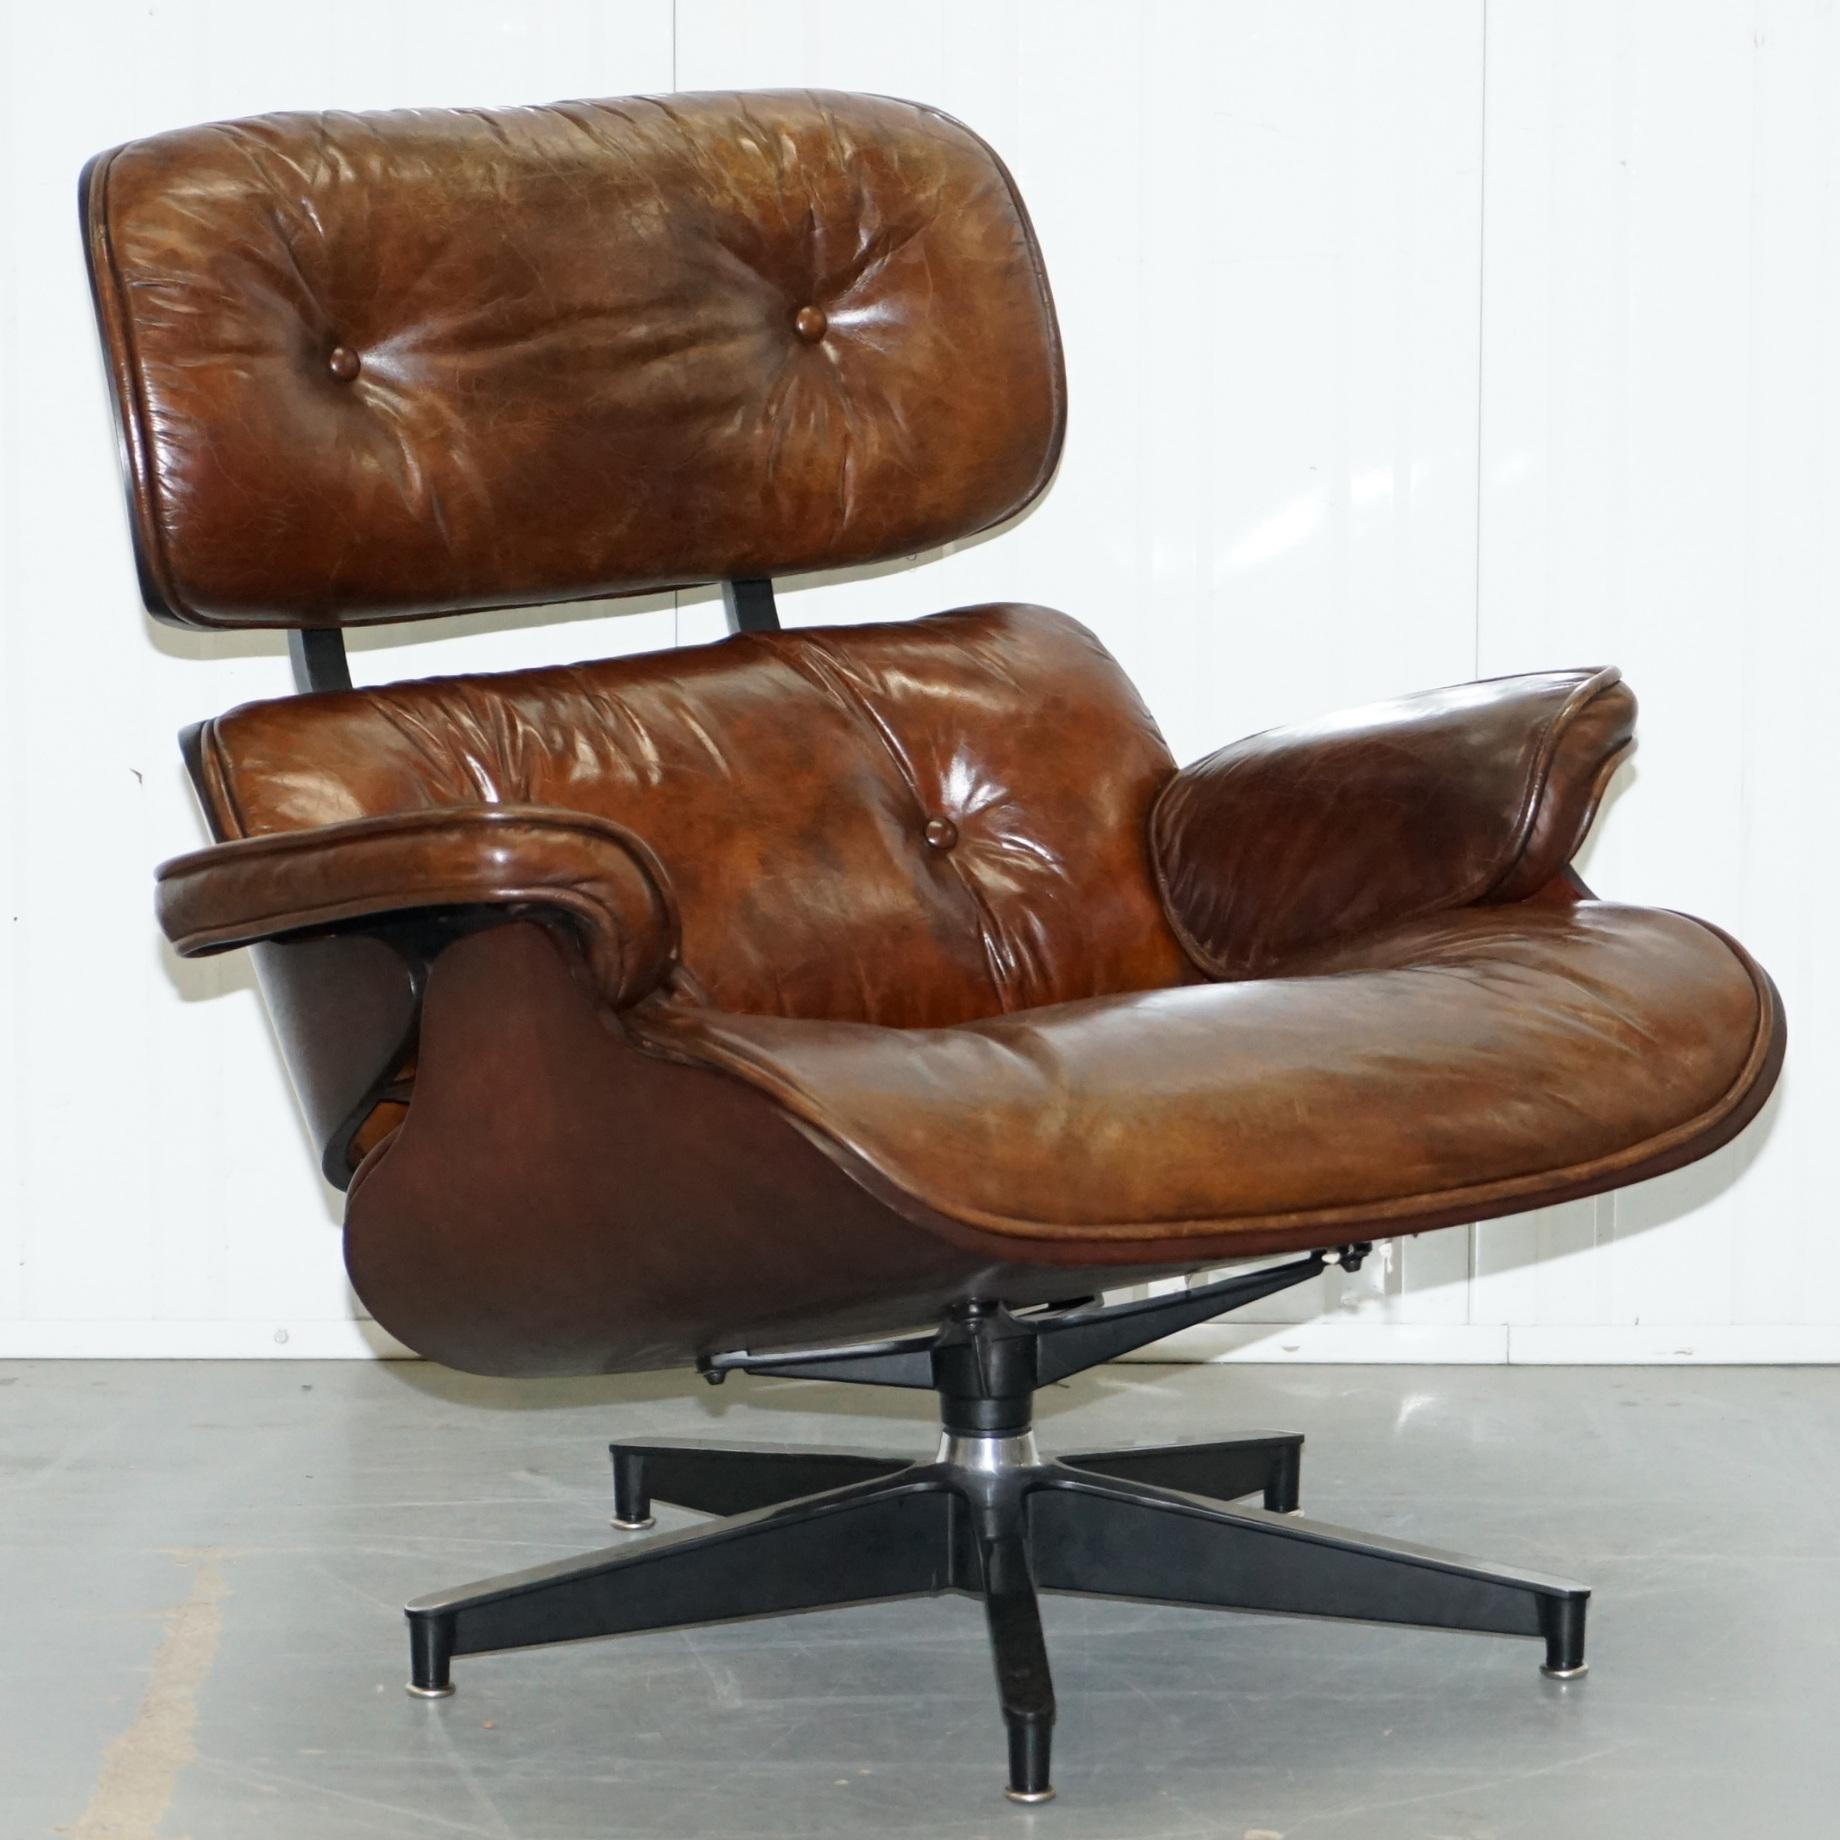 Wimbledon-Furniture

Wimbledon-Furniture is delighted to offer for sale this vintage heritage brown leather lounge armchair and matching ottoman

Please note the delivery fee listed is just a guide, it covers within the M25 only, for an accurate